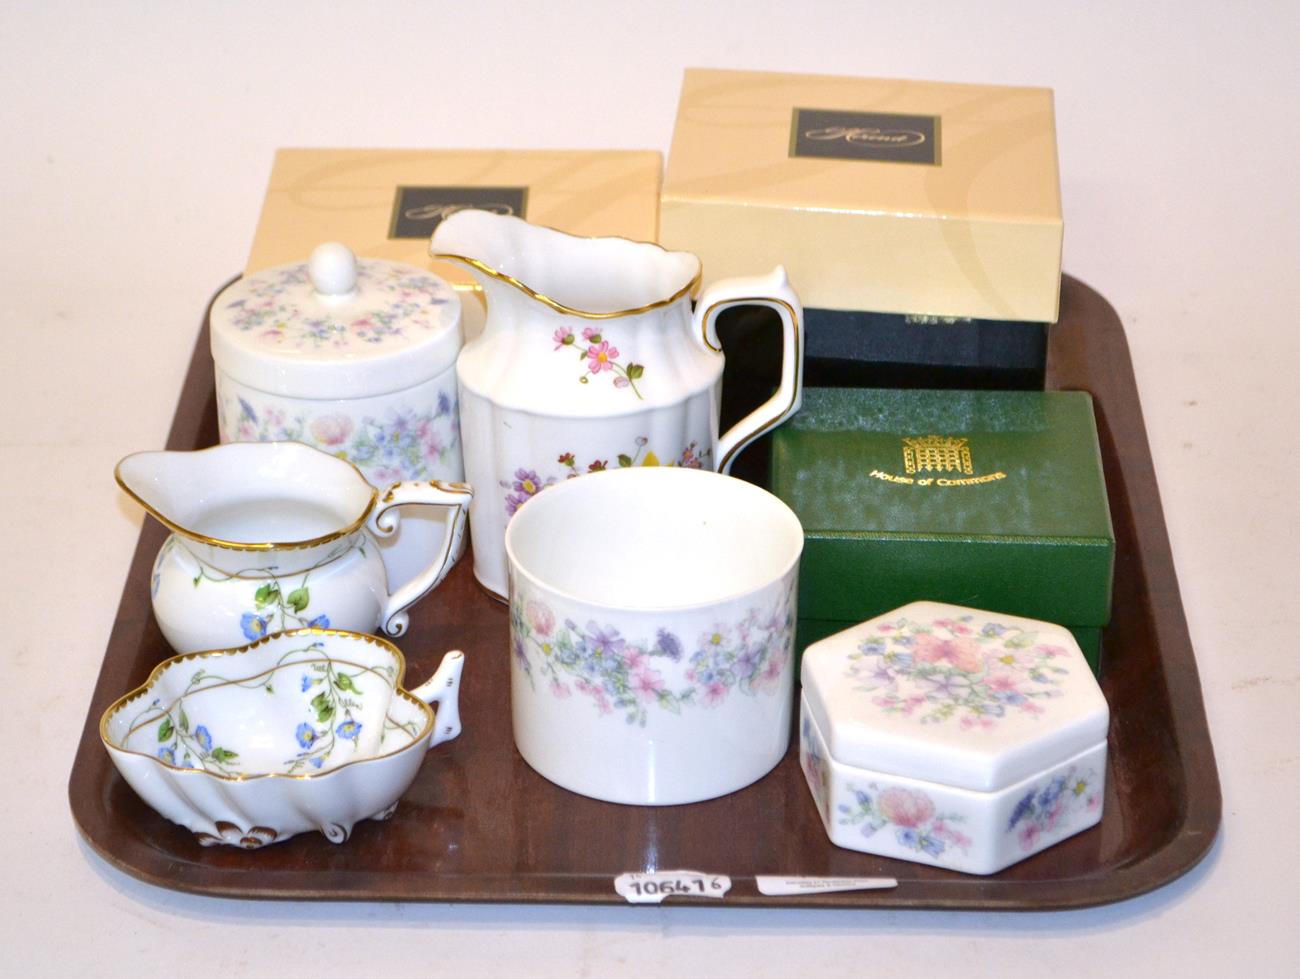 Lot 168 - A Herend porcelain creamer and sucrier (boxed) with other porcelain